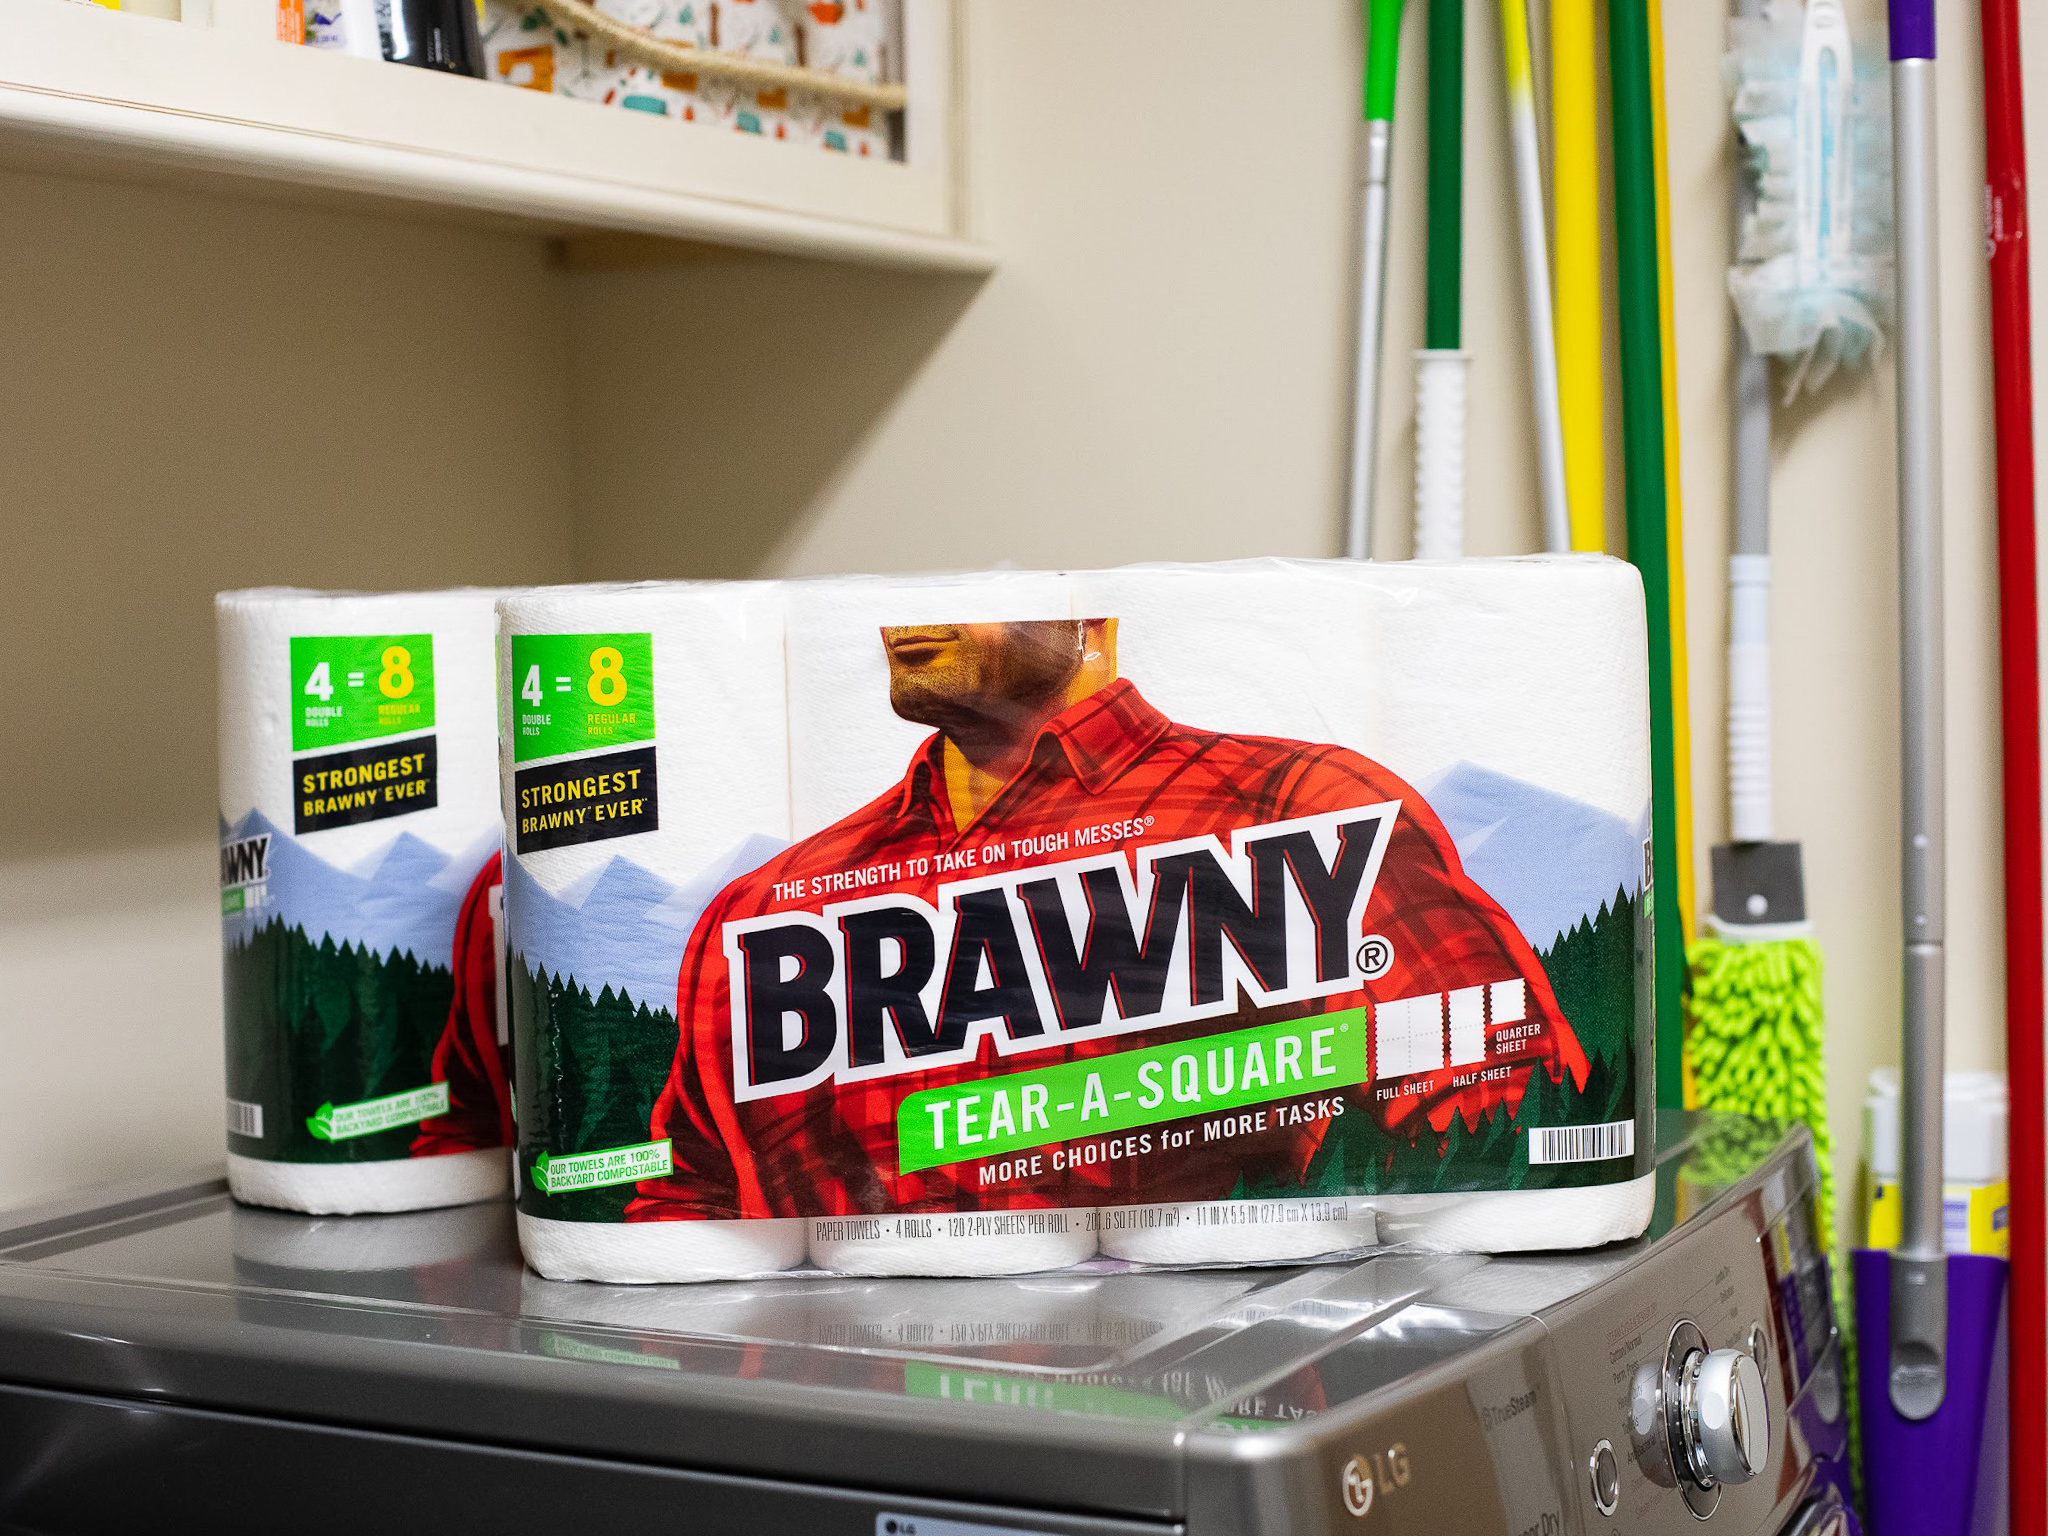 Brawny Paper Towels As Low As $4.25 At Publix (Regular Price $10.99!)